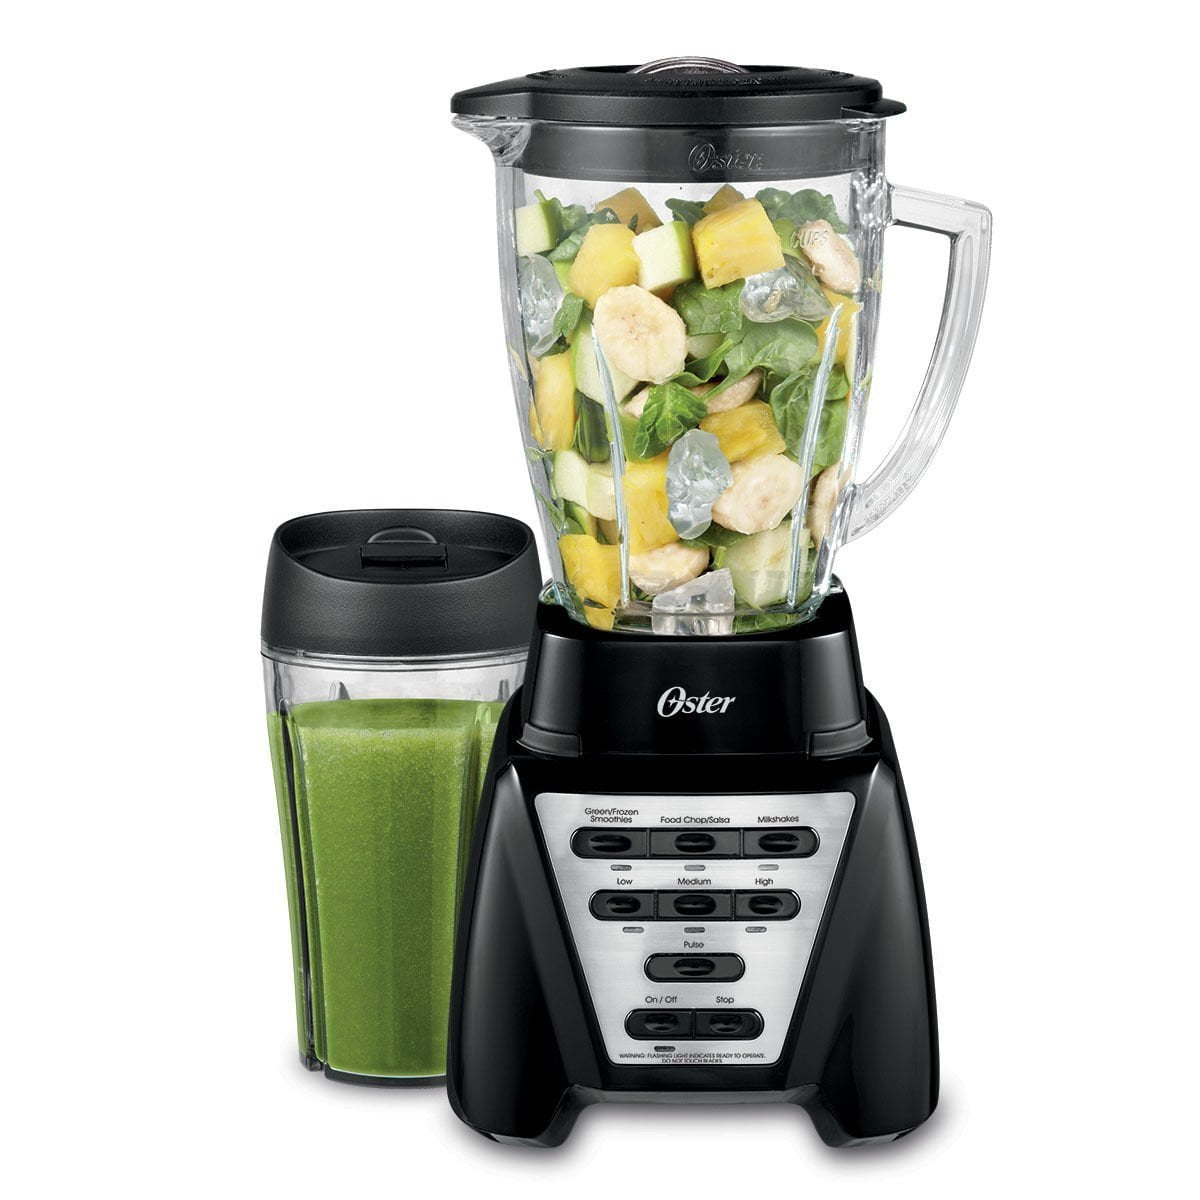 GZZT 2L Smoothie Blender Smoothie Cup Blender Cup Professional